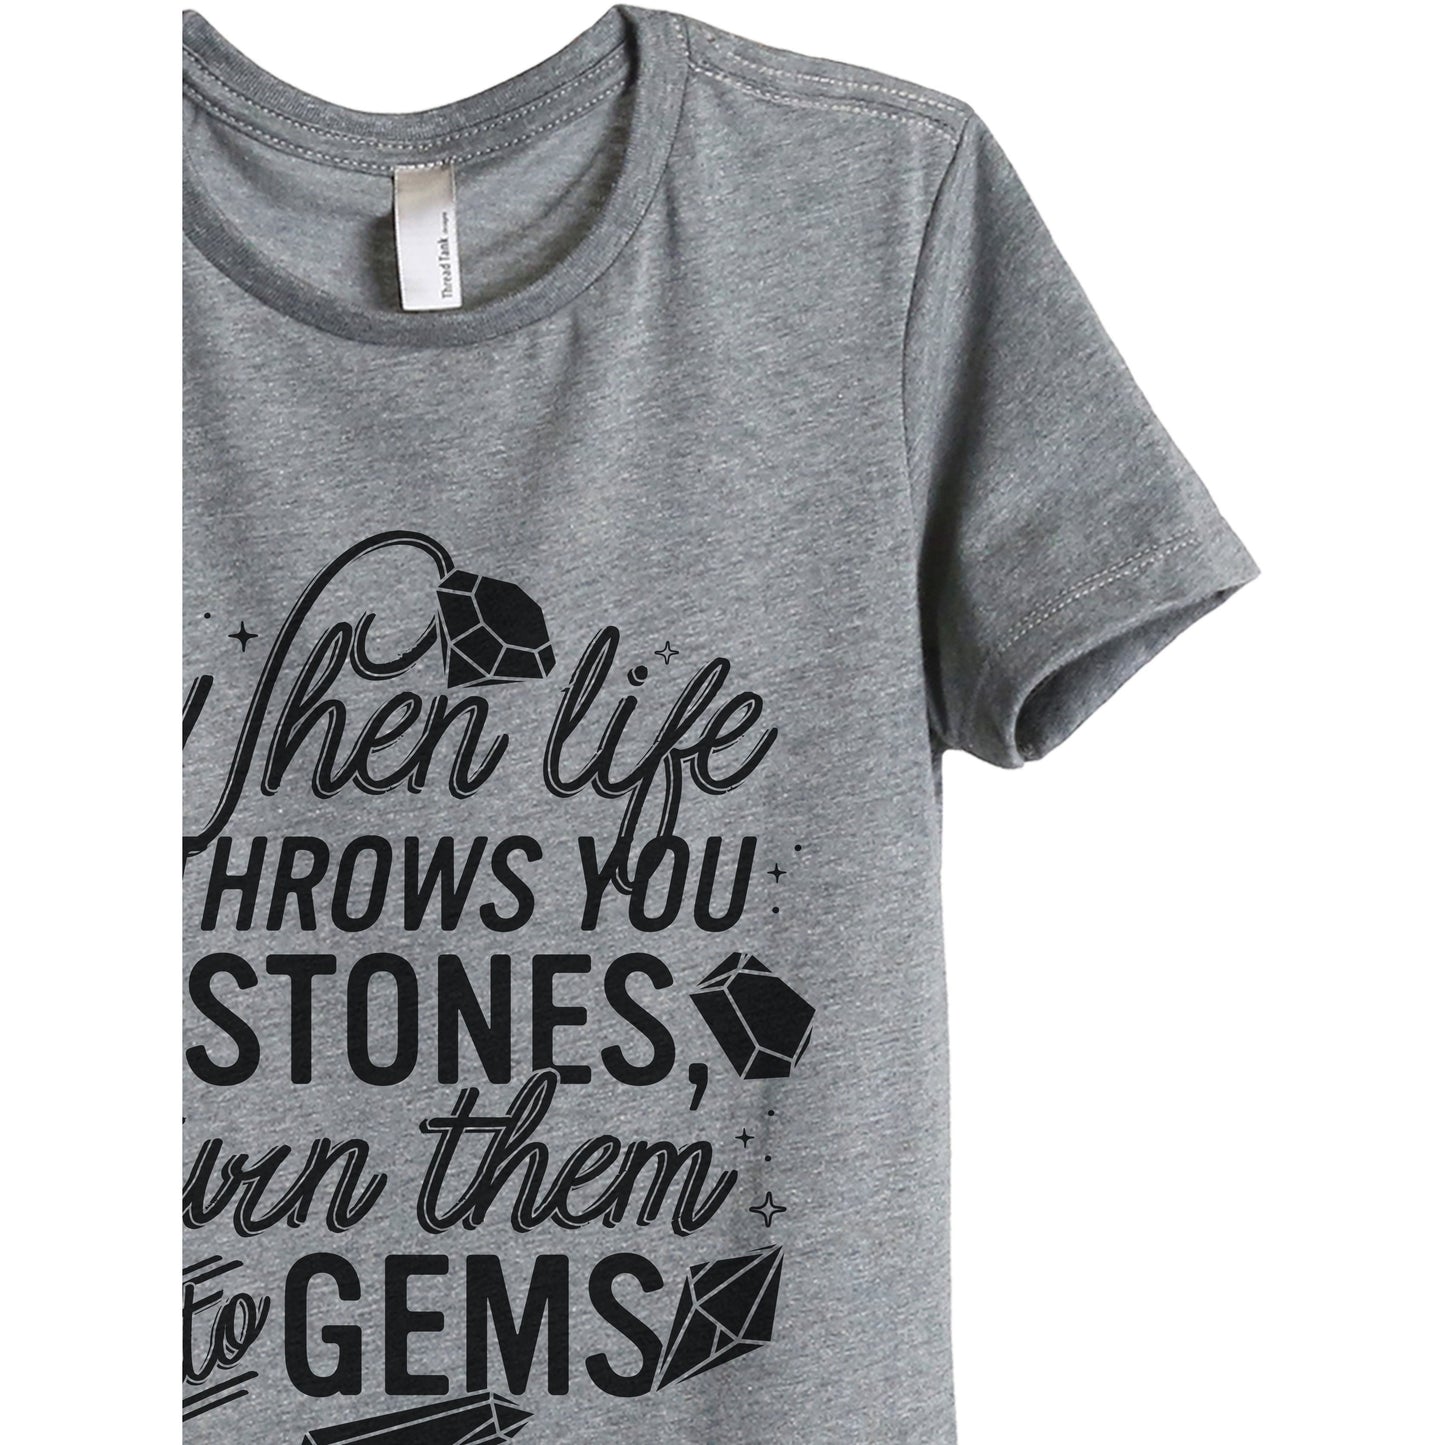 When Life Throws You Stones, Turn Them Into Gems - Stories You Can Wear by Thread Tank